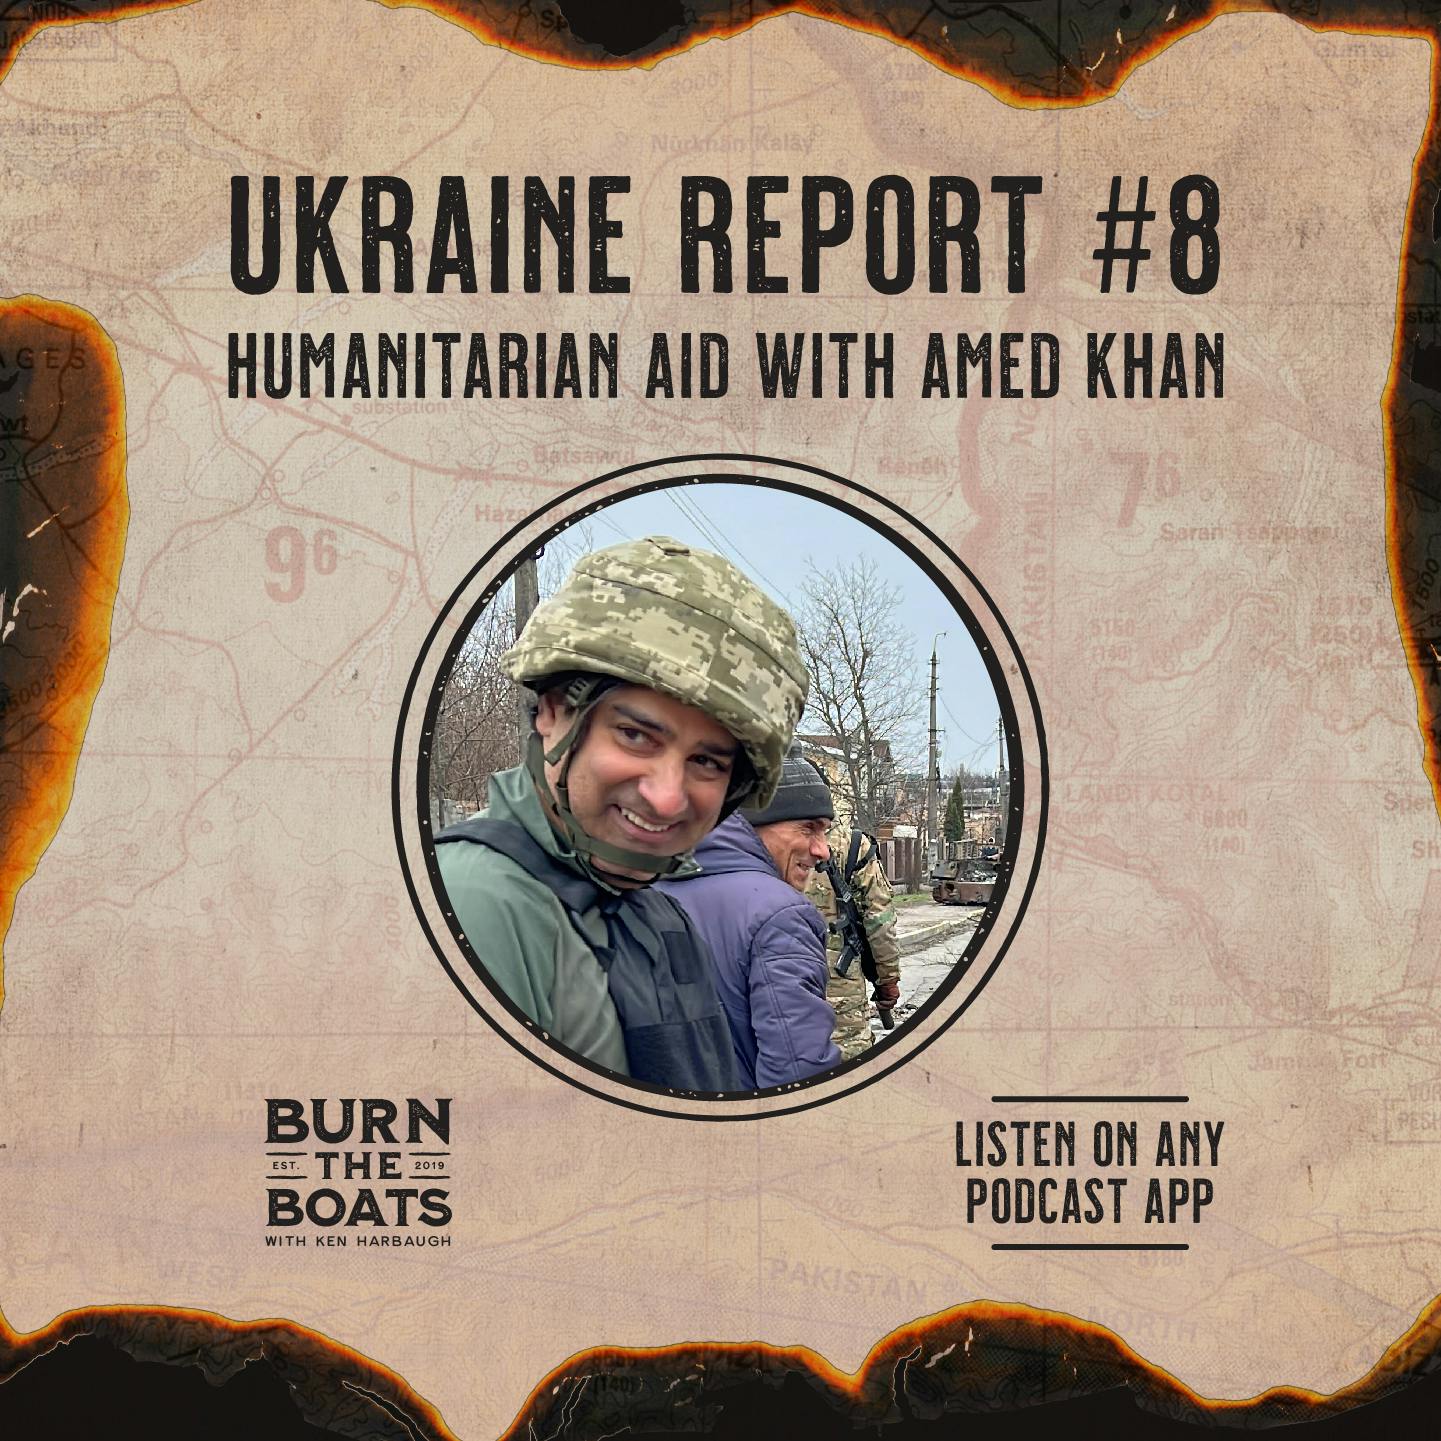 Ukraine Report #8: Humanitarian Aid with Amed Khan